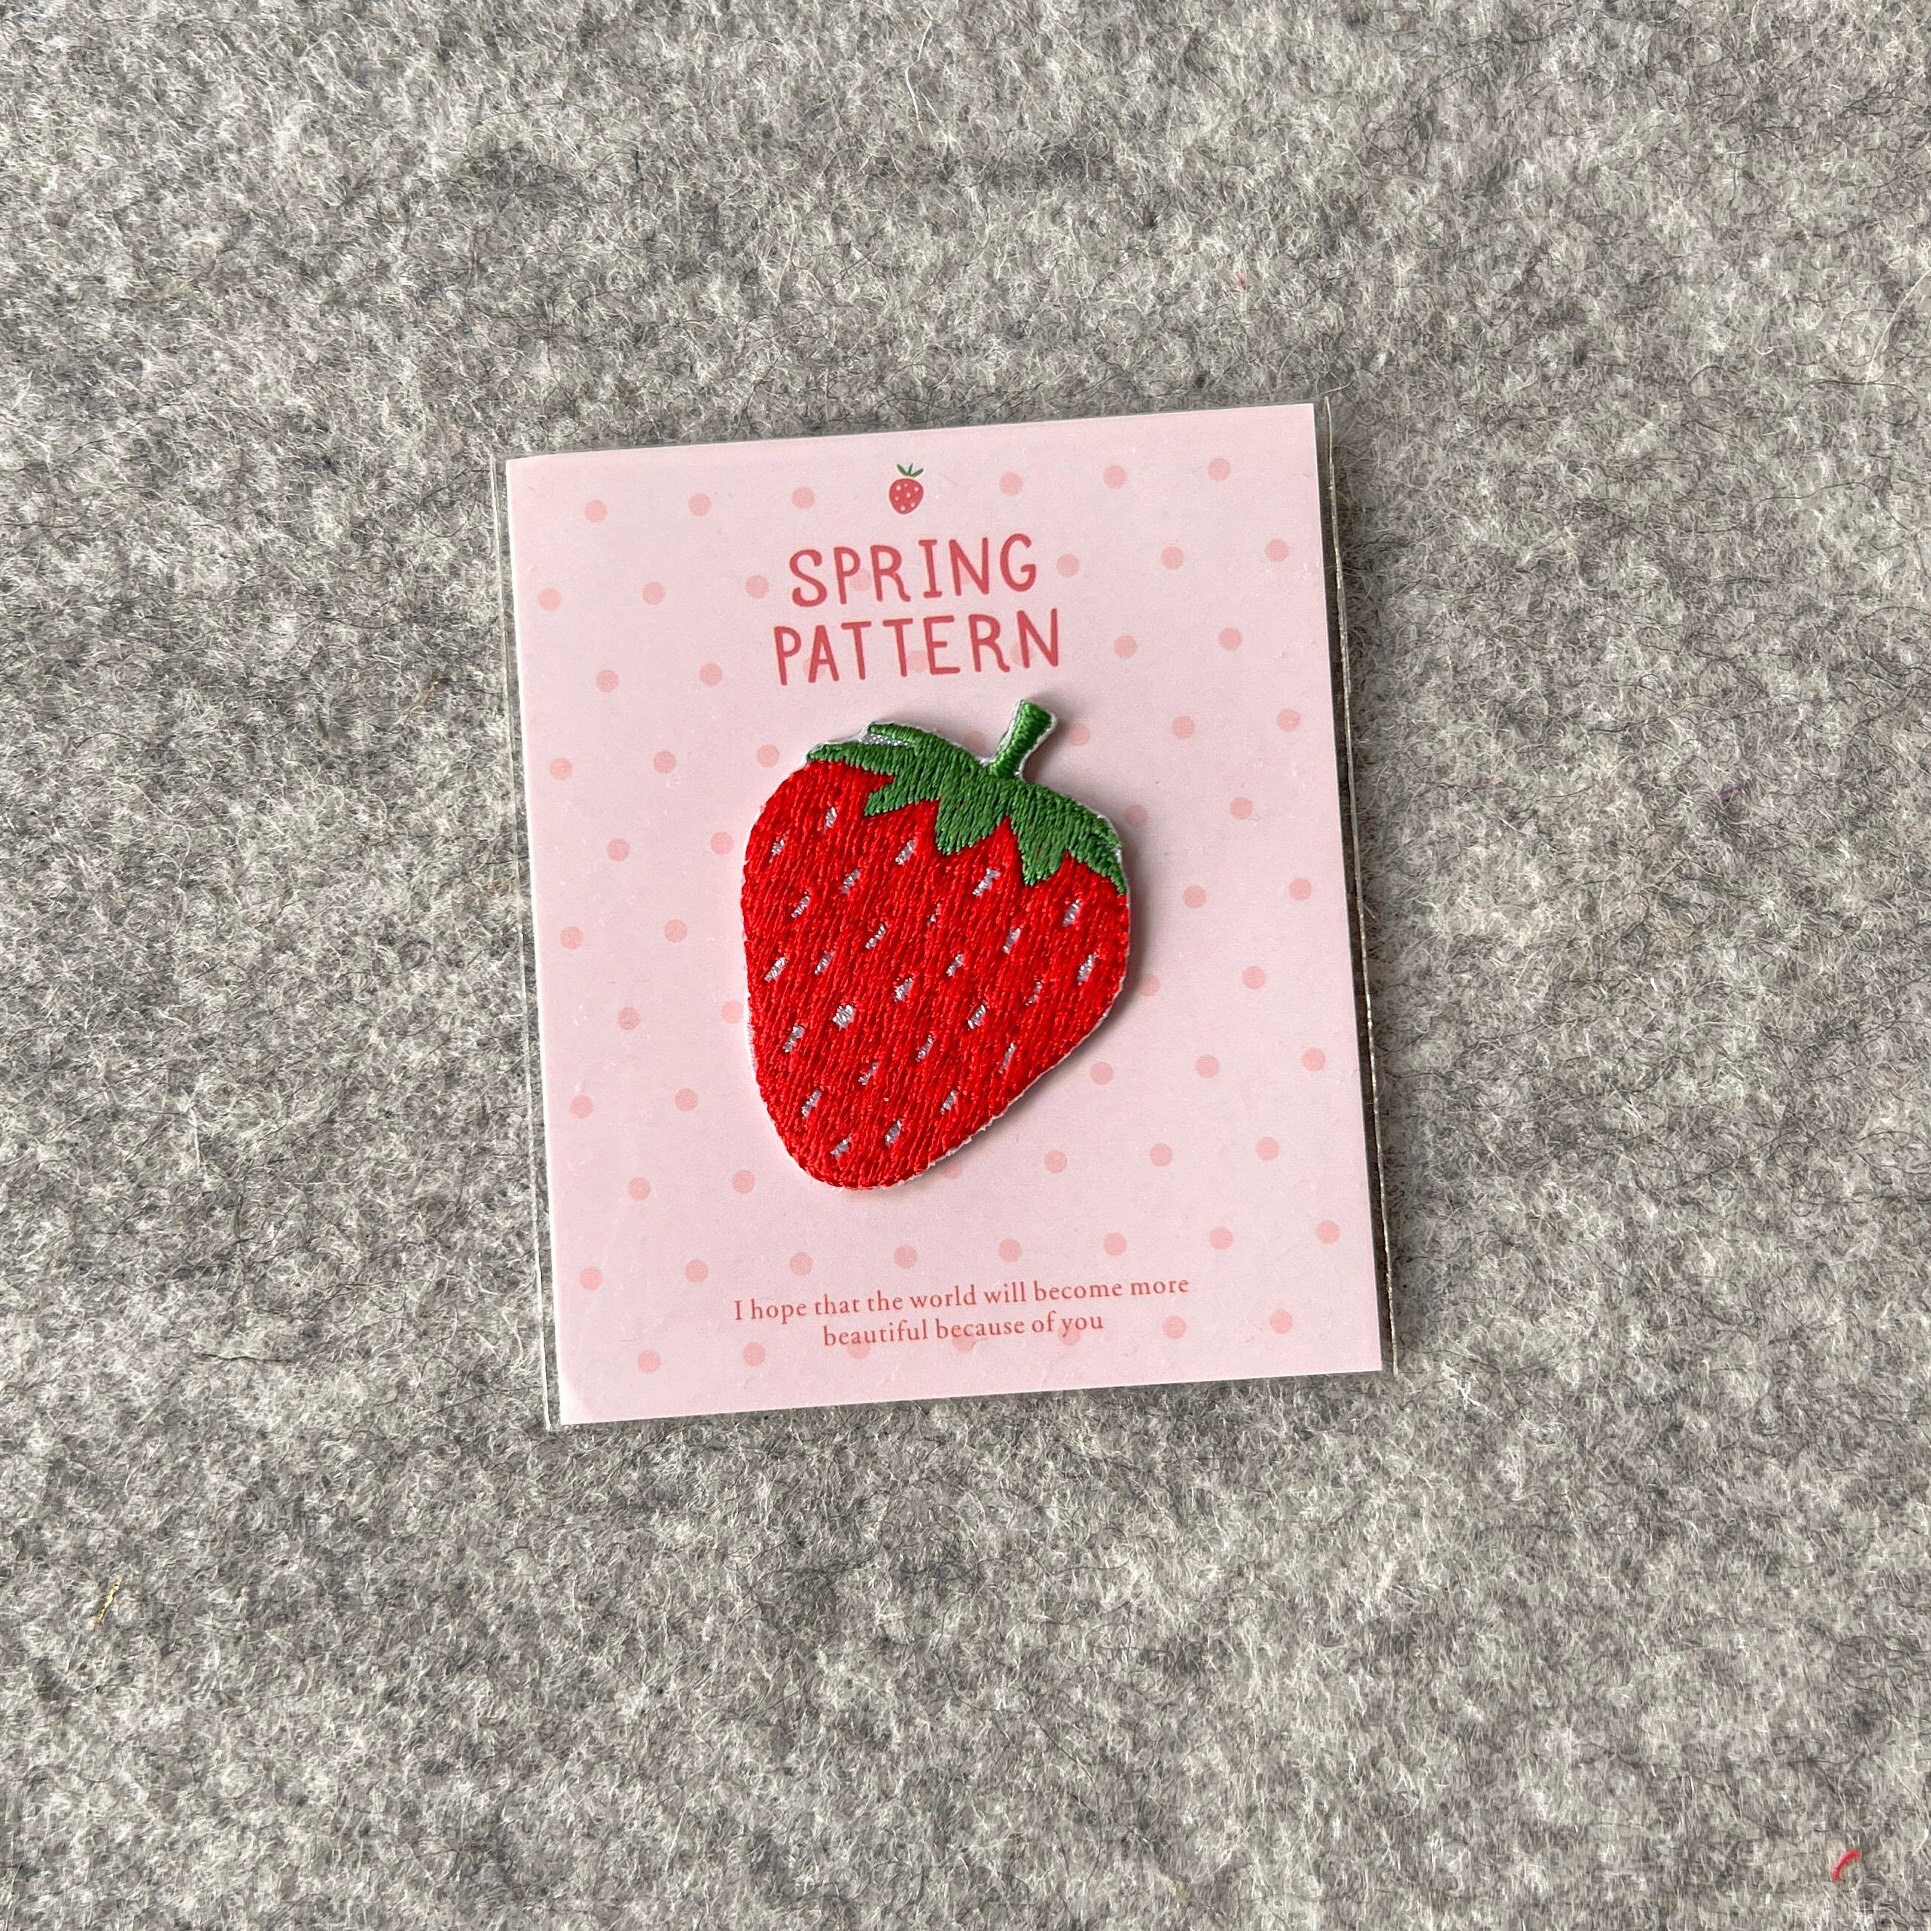 3pcs Strawberry Embroidered Patches,Funny Iron on Patches for Clothes, Cute Strawberry Embroidered Sew-On/Iron-On Appliques Patch for Kids Clothes